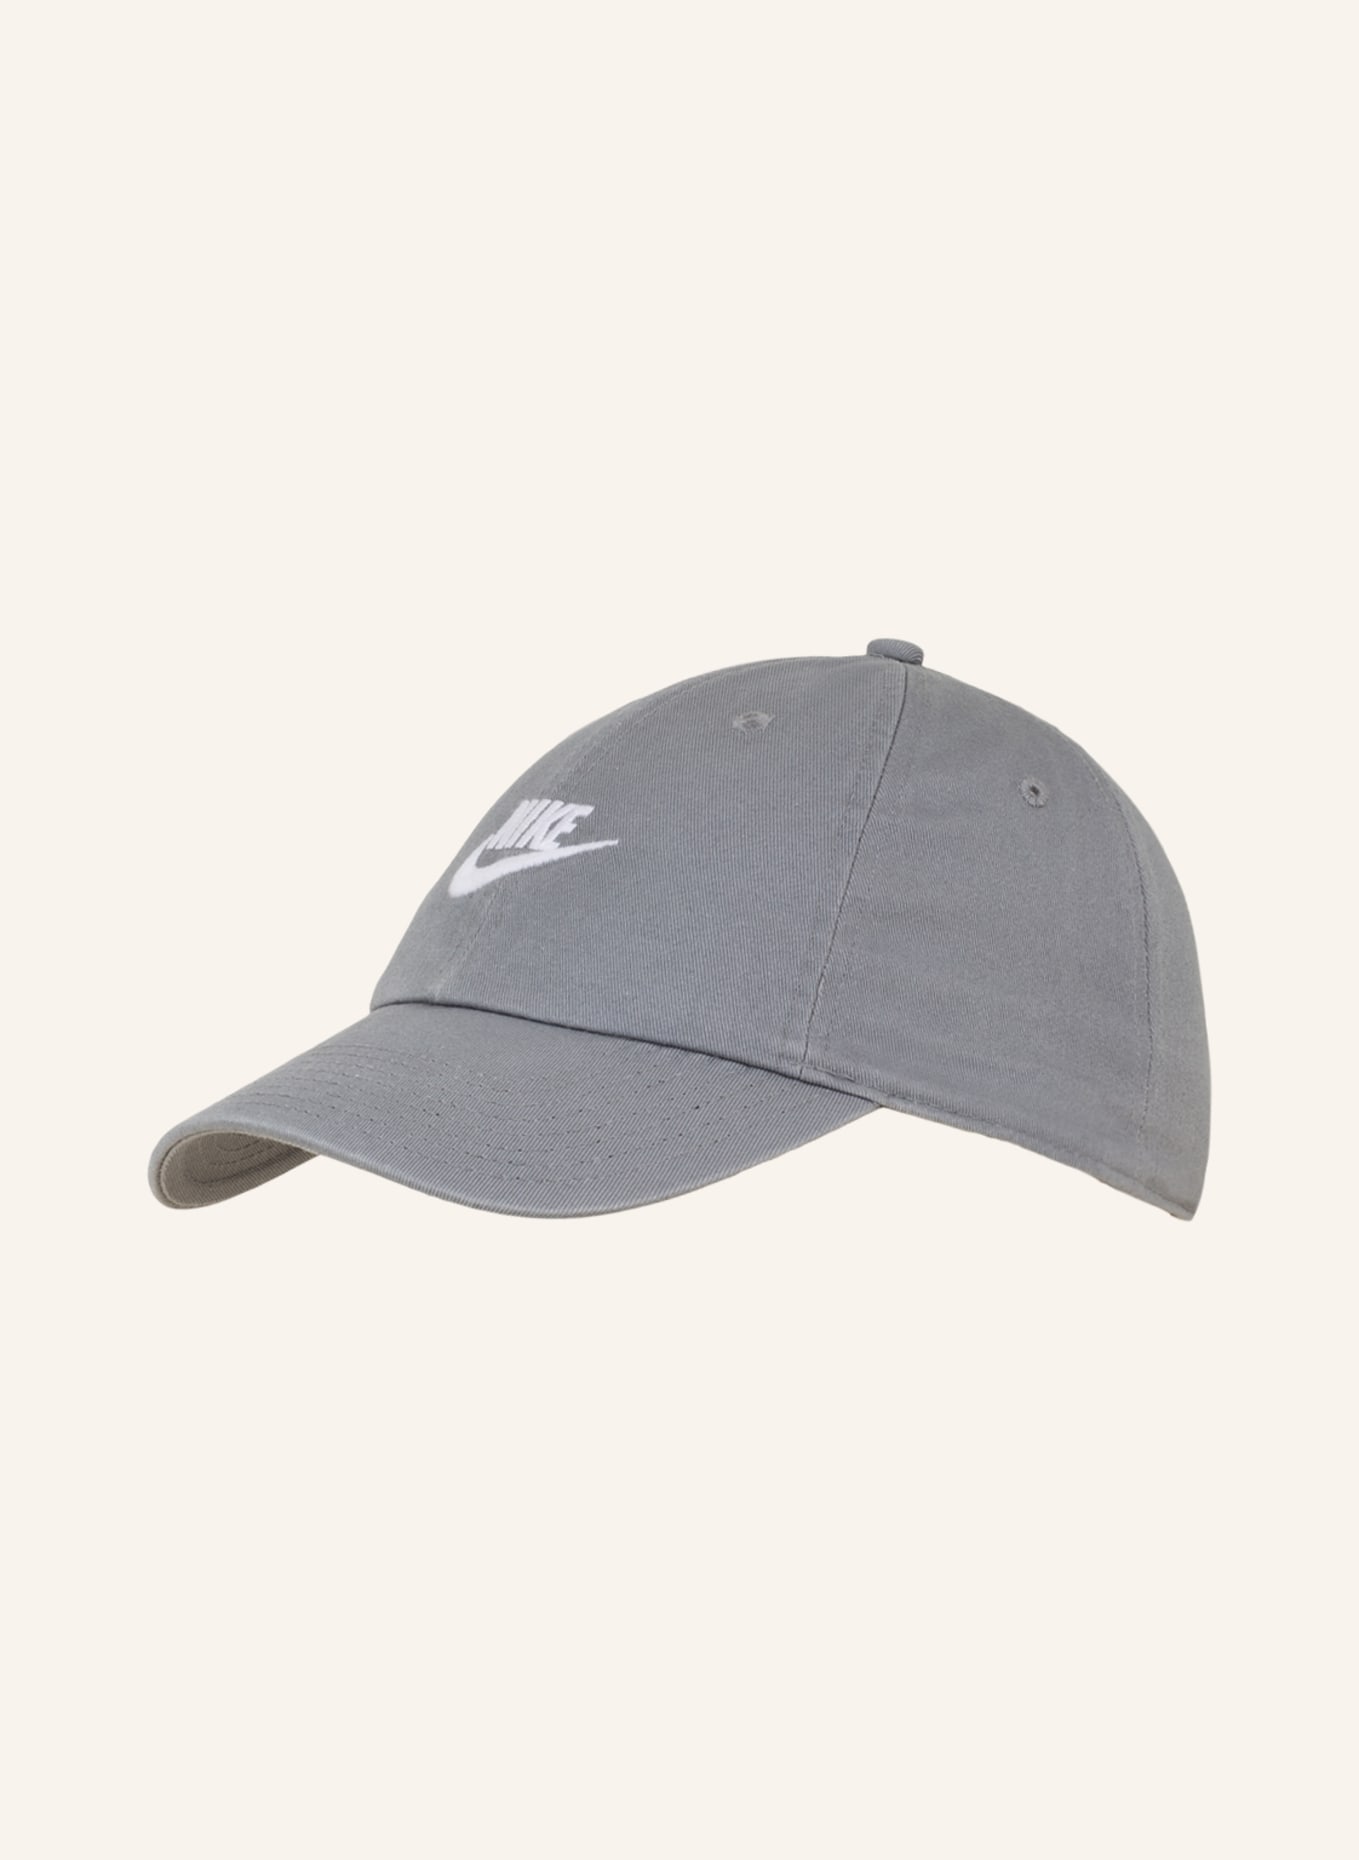 Nike Cap HERITAGE86, Color: GRAY (Image 1)